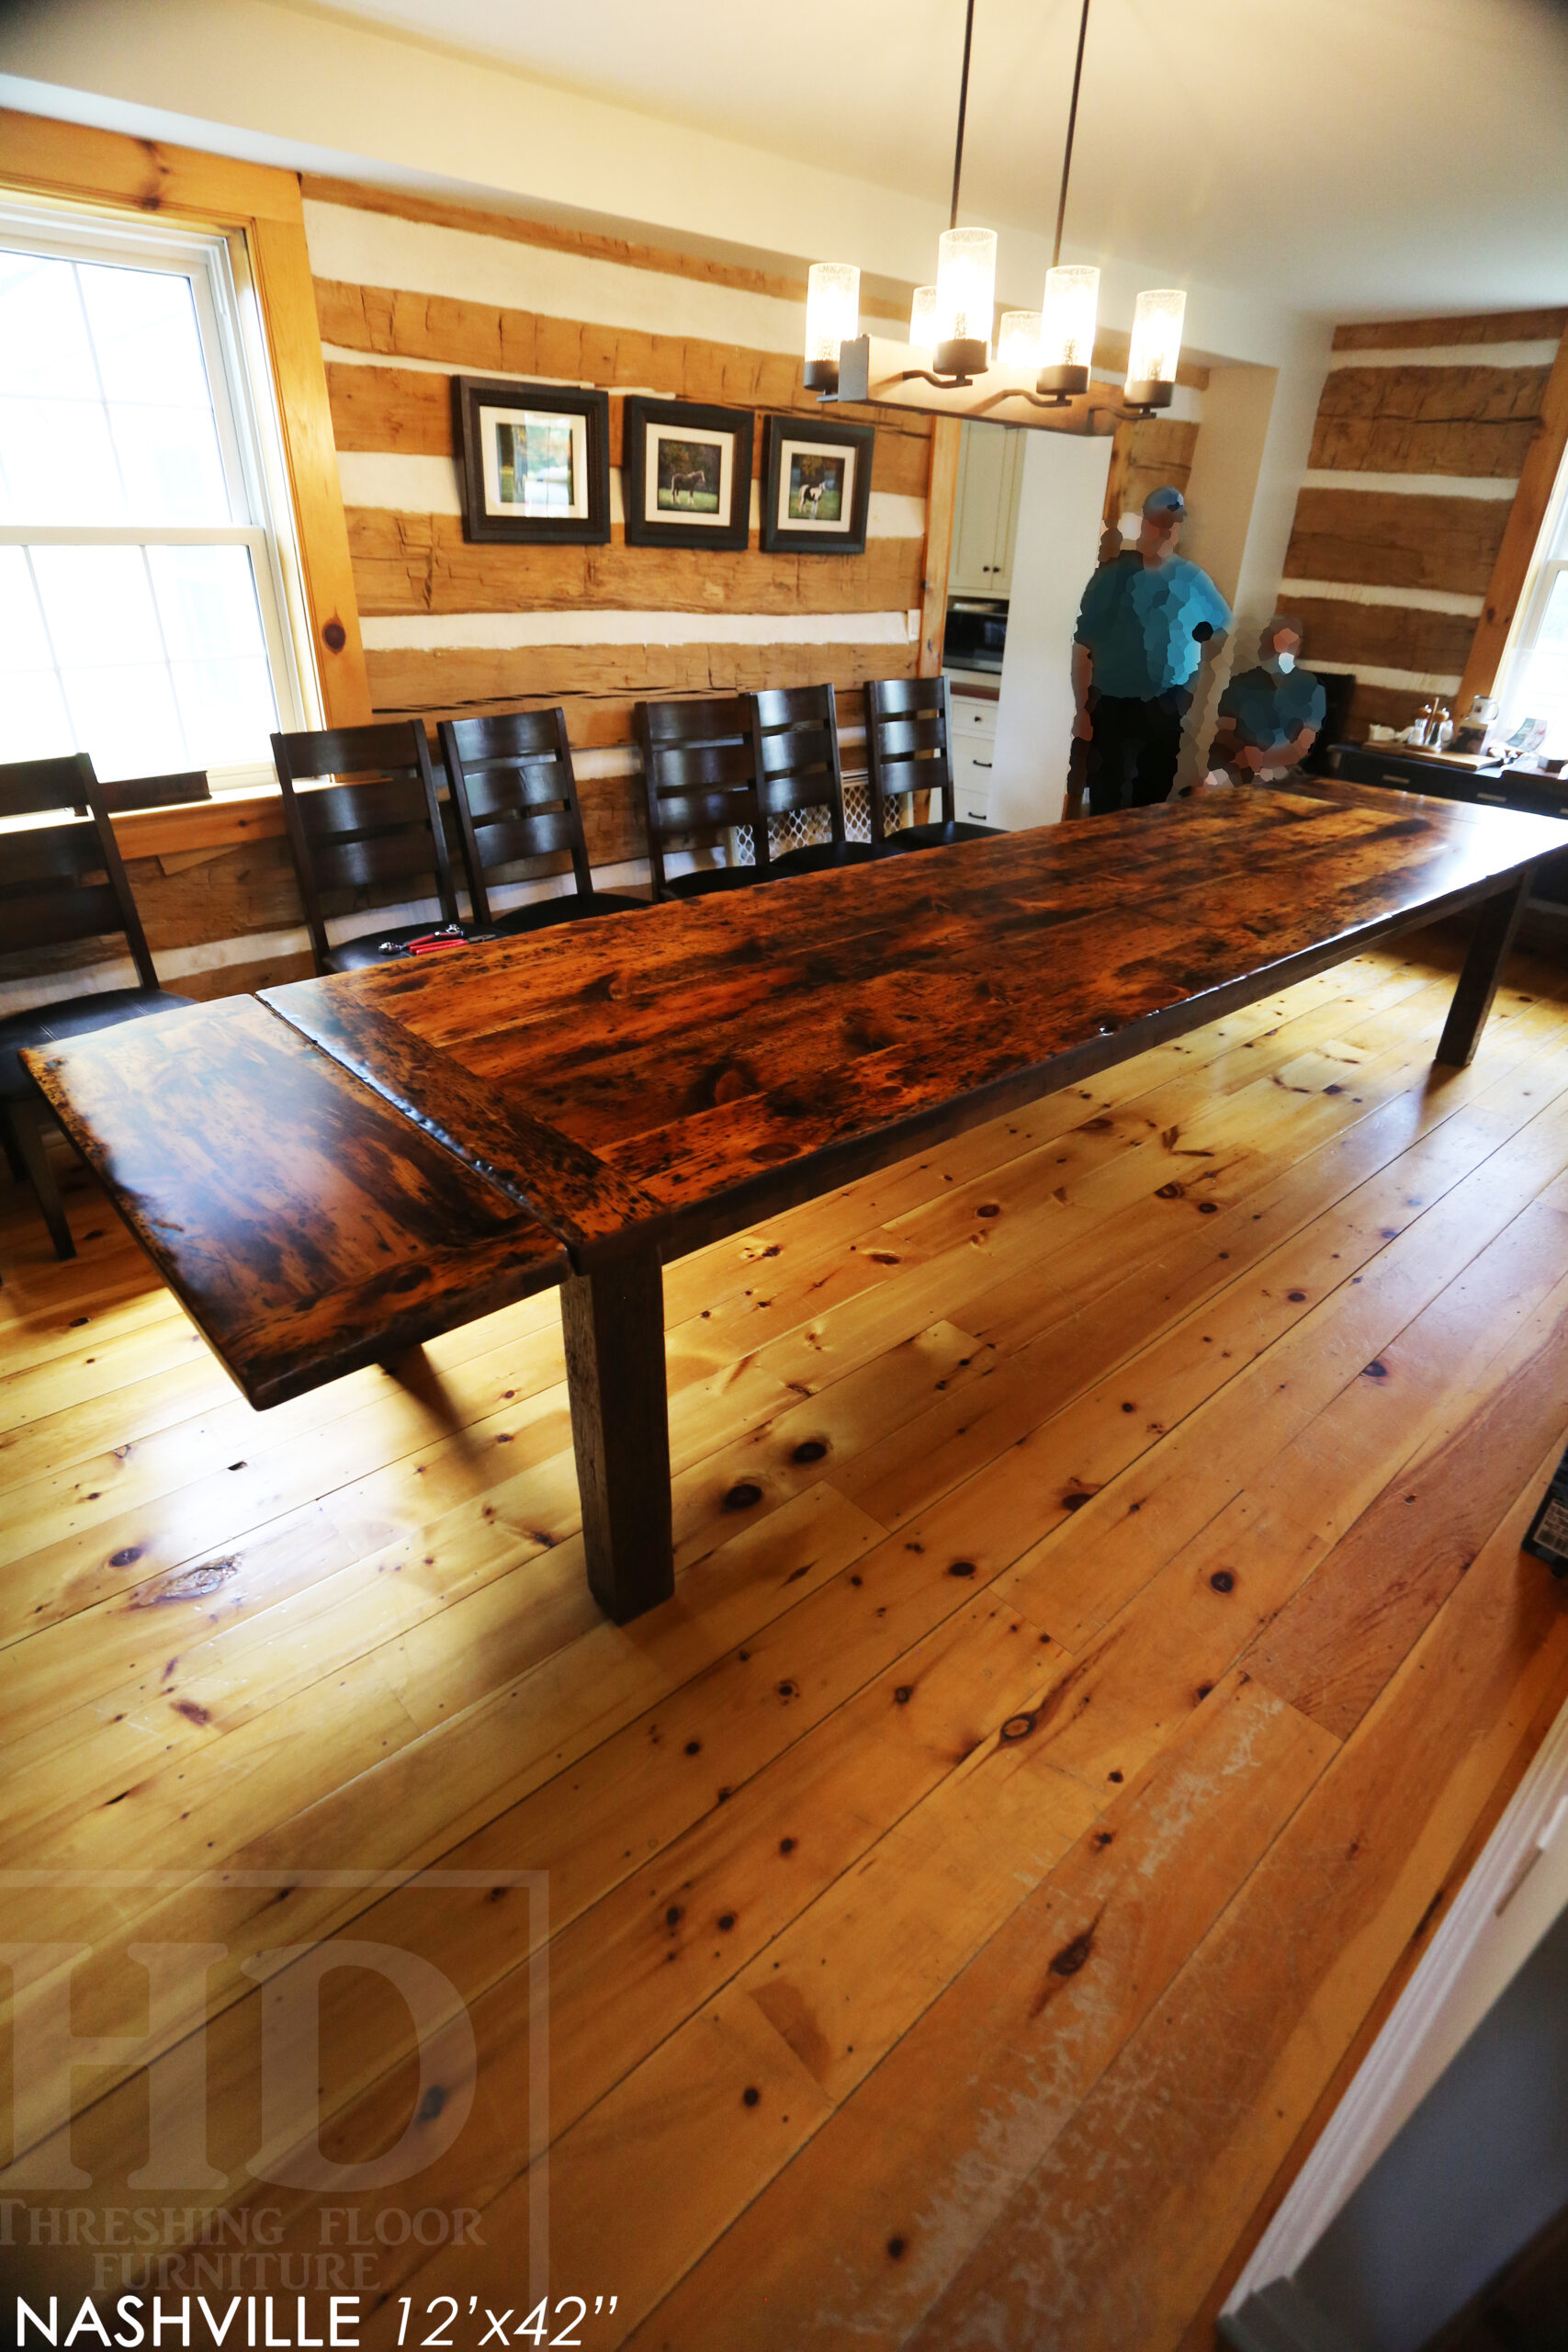 12' Ontario Barnwood Harvest Table we made for a Bolton, Ontario home - 42" wide - Original edges & distressing maintained - Old growth Pine Threshing Floor 2" Top - Straight 4"x4" Windbrace Beam Legs - Two 15" Leaf Extensions [making total length 174" when extended] - Premium epoxy + satin polyurethane finish - www.table.ca